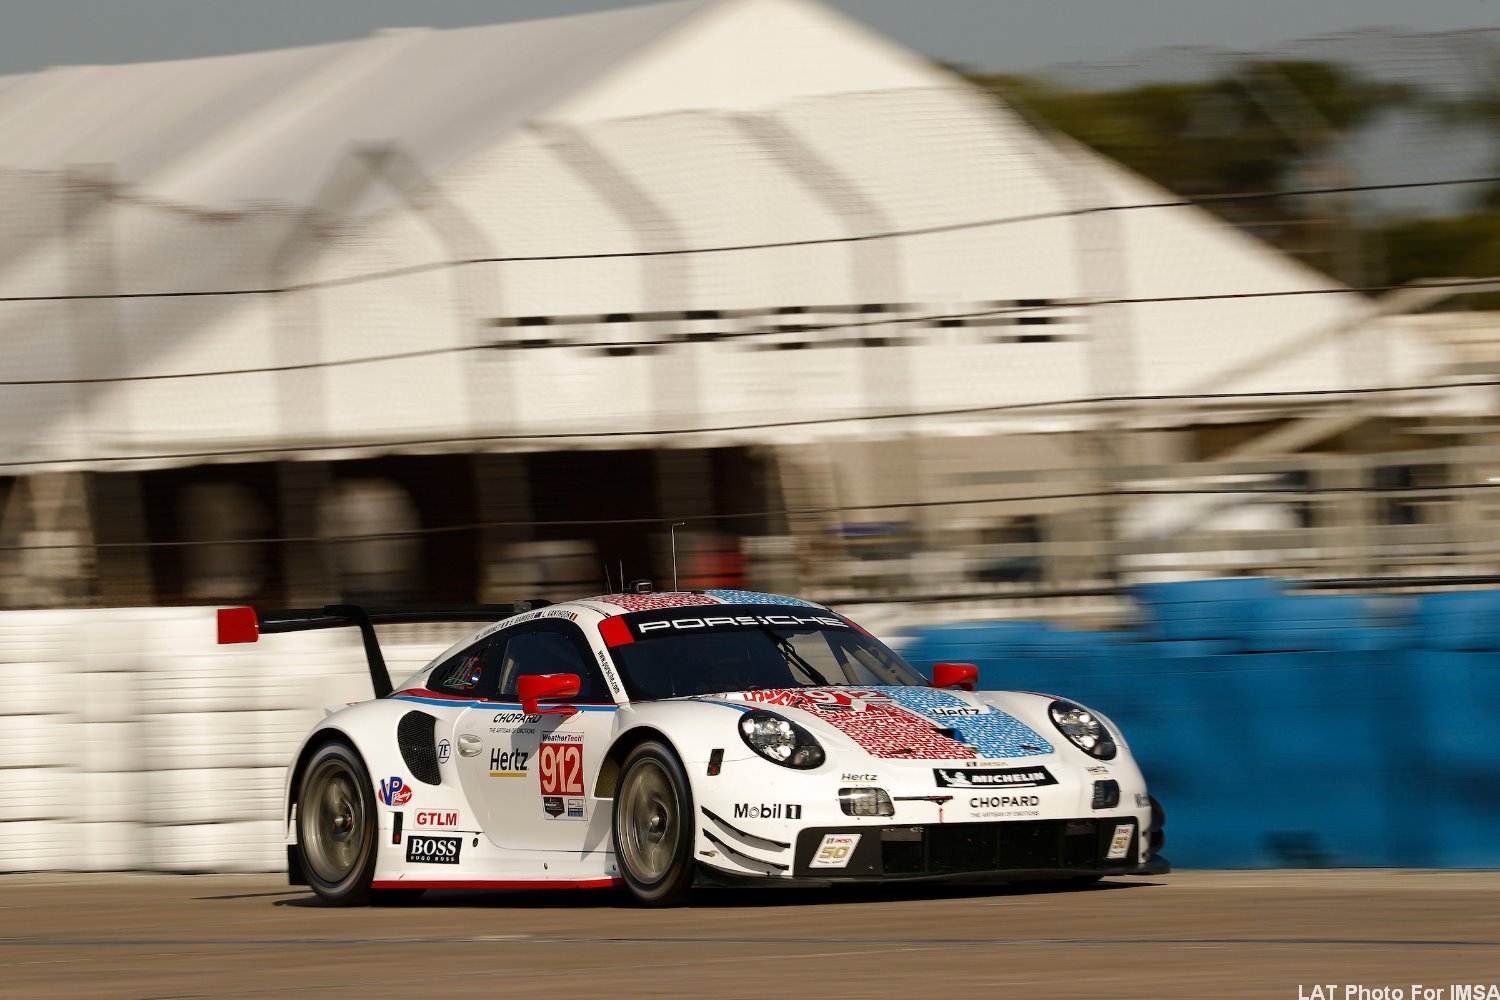 The #912 Porsche takes GTLM honors